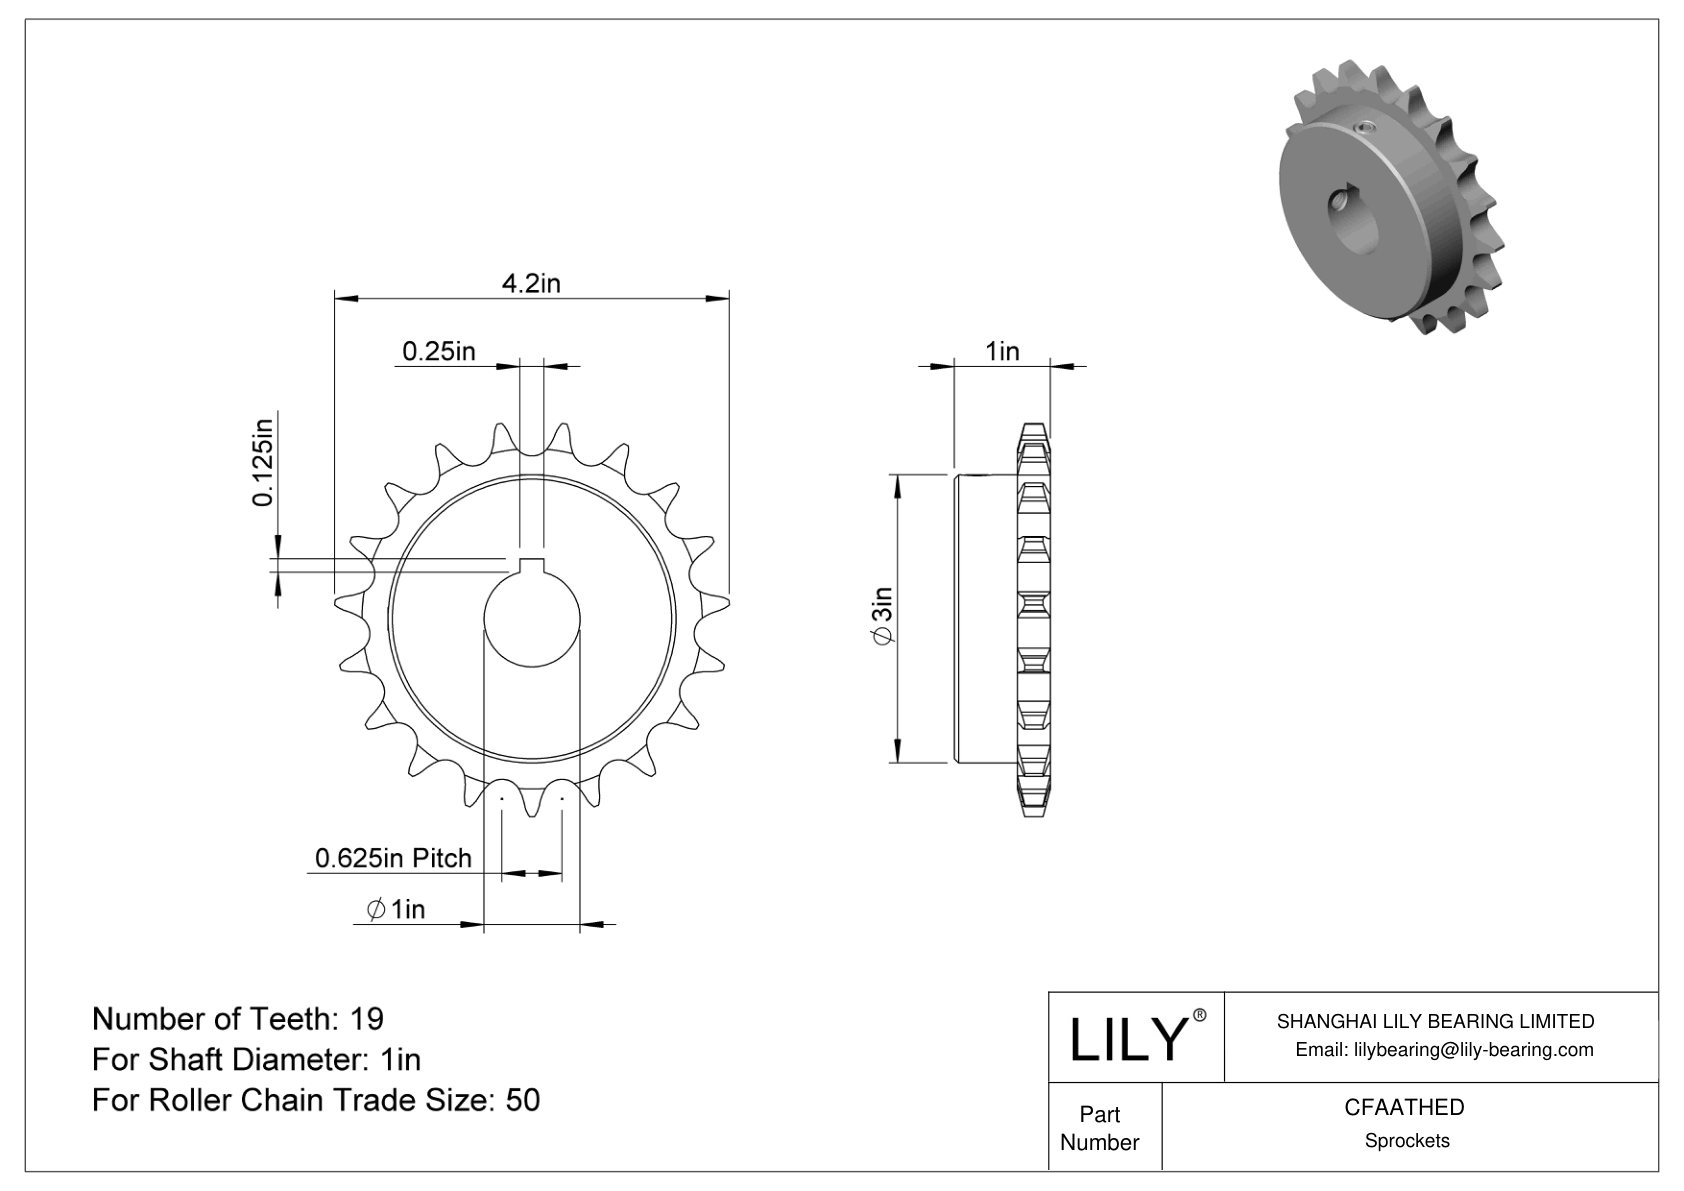 CFAATHED Wear-Resistant Sprockets for ANSI Roller Chain cad drawing